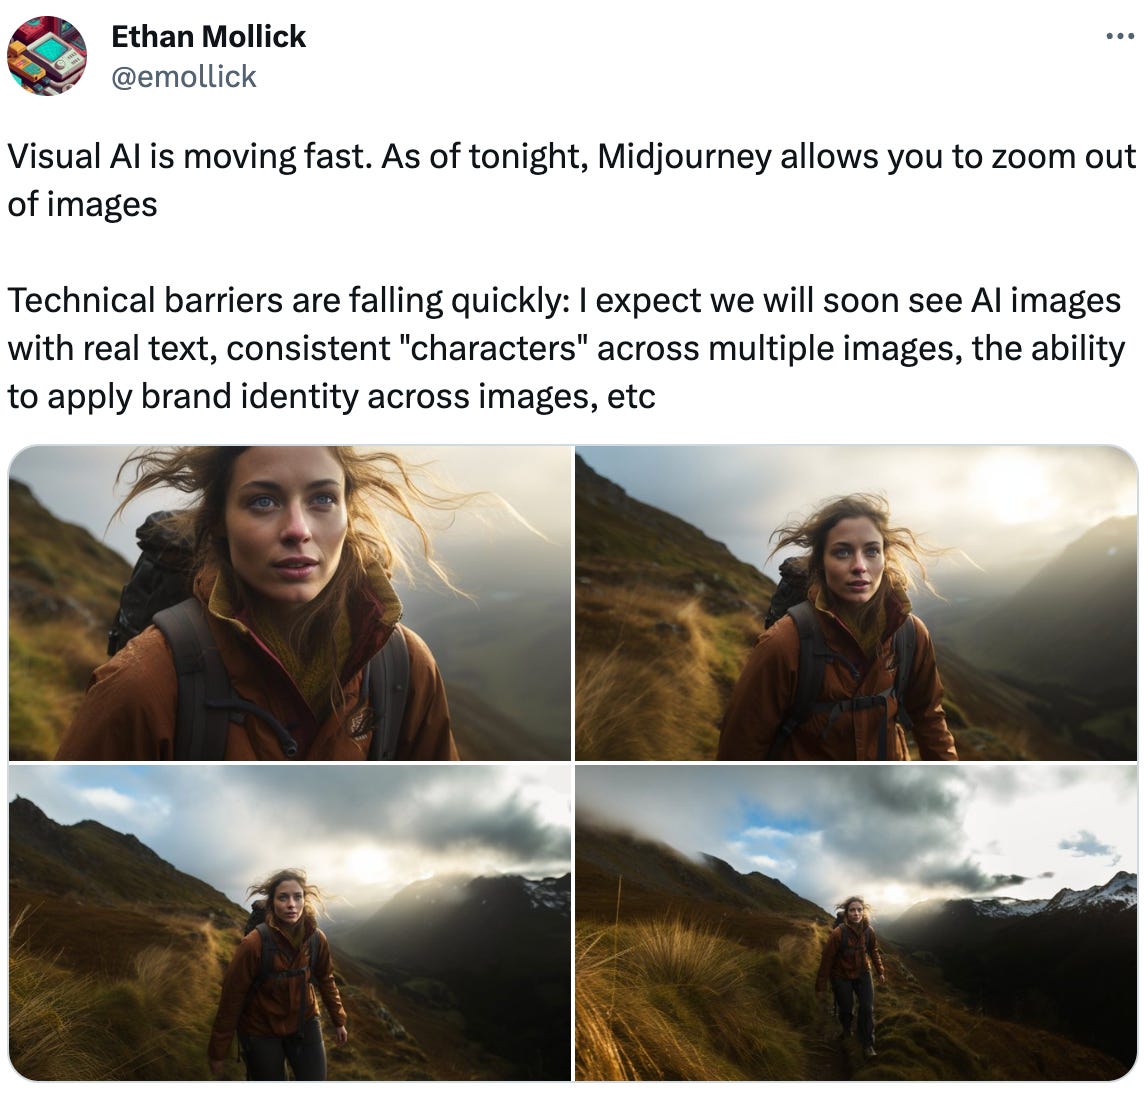  Ethan Mollick @emollick Visual AI is moving fast. As of tonight, Midjourney allows you to zoom out of images  Technical barriers are falling quickly: I expect we will soon see AI images with real text, consistent "characters" across multiple images, the ability to apply brand identity across images, etc